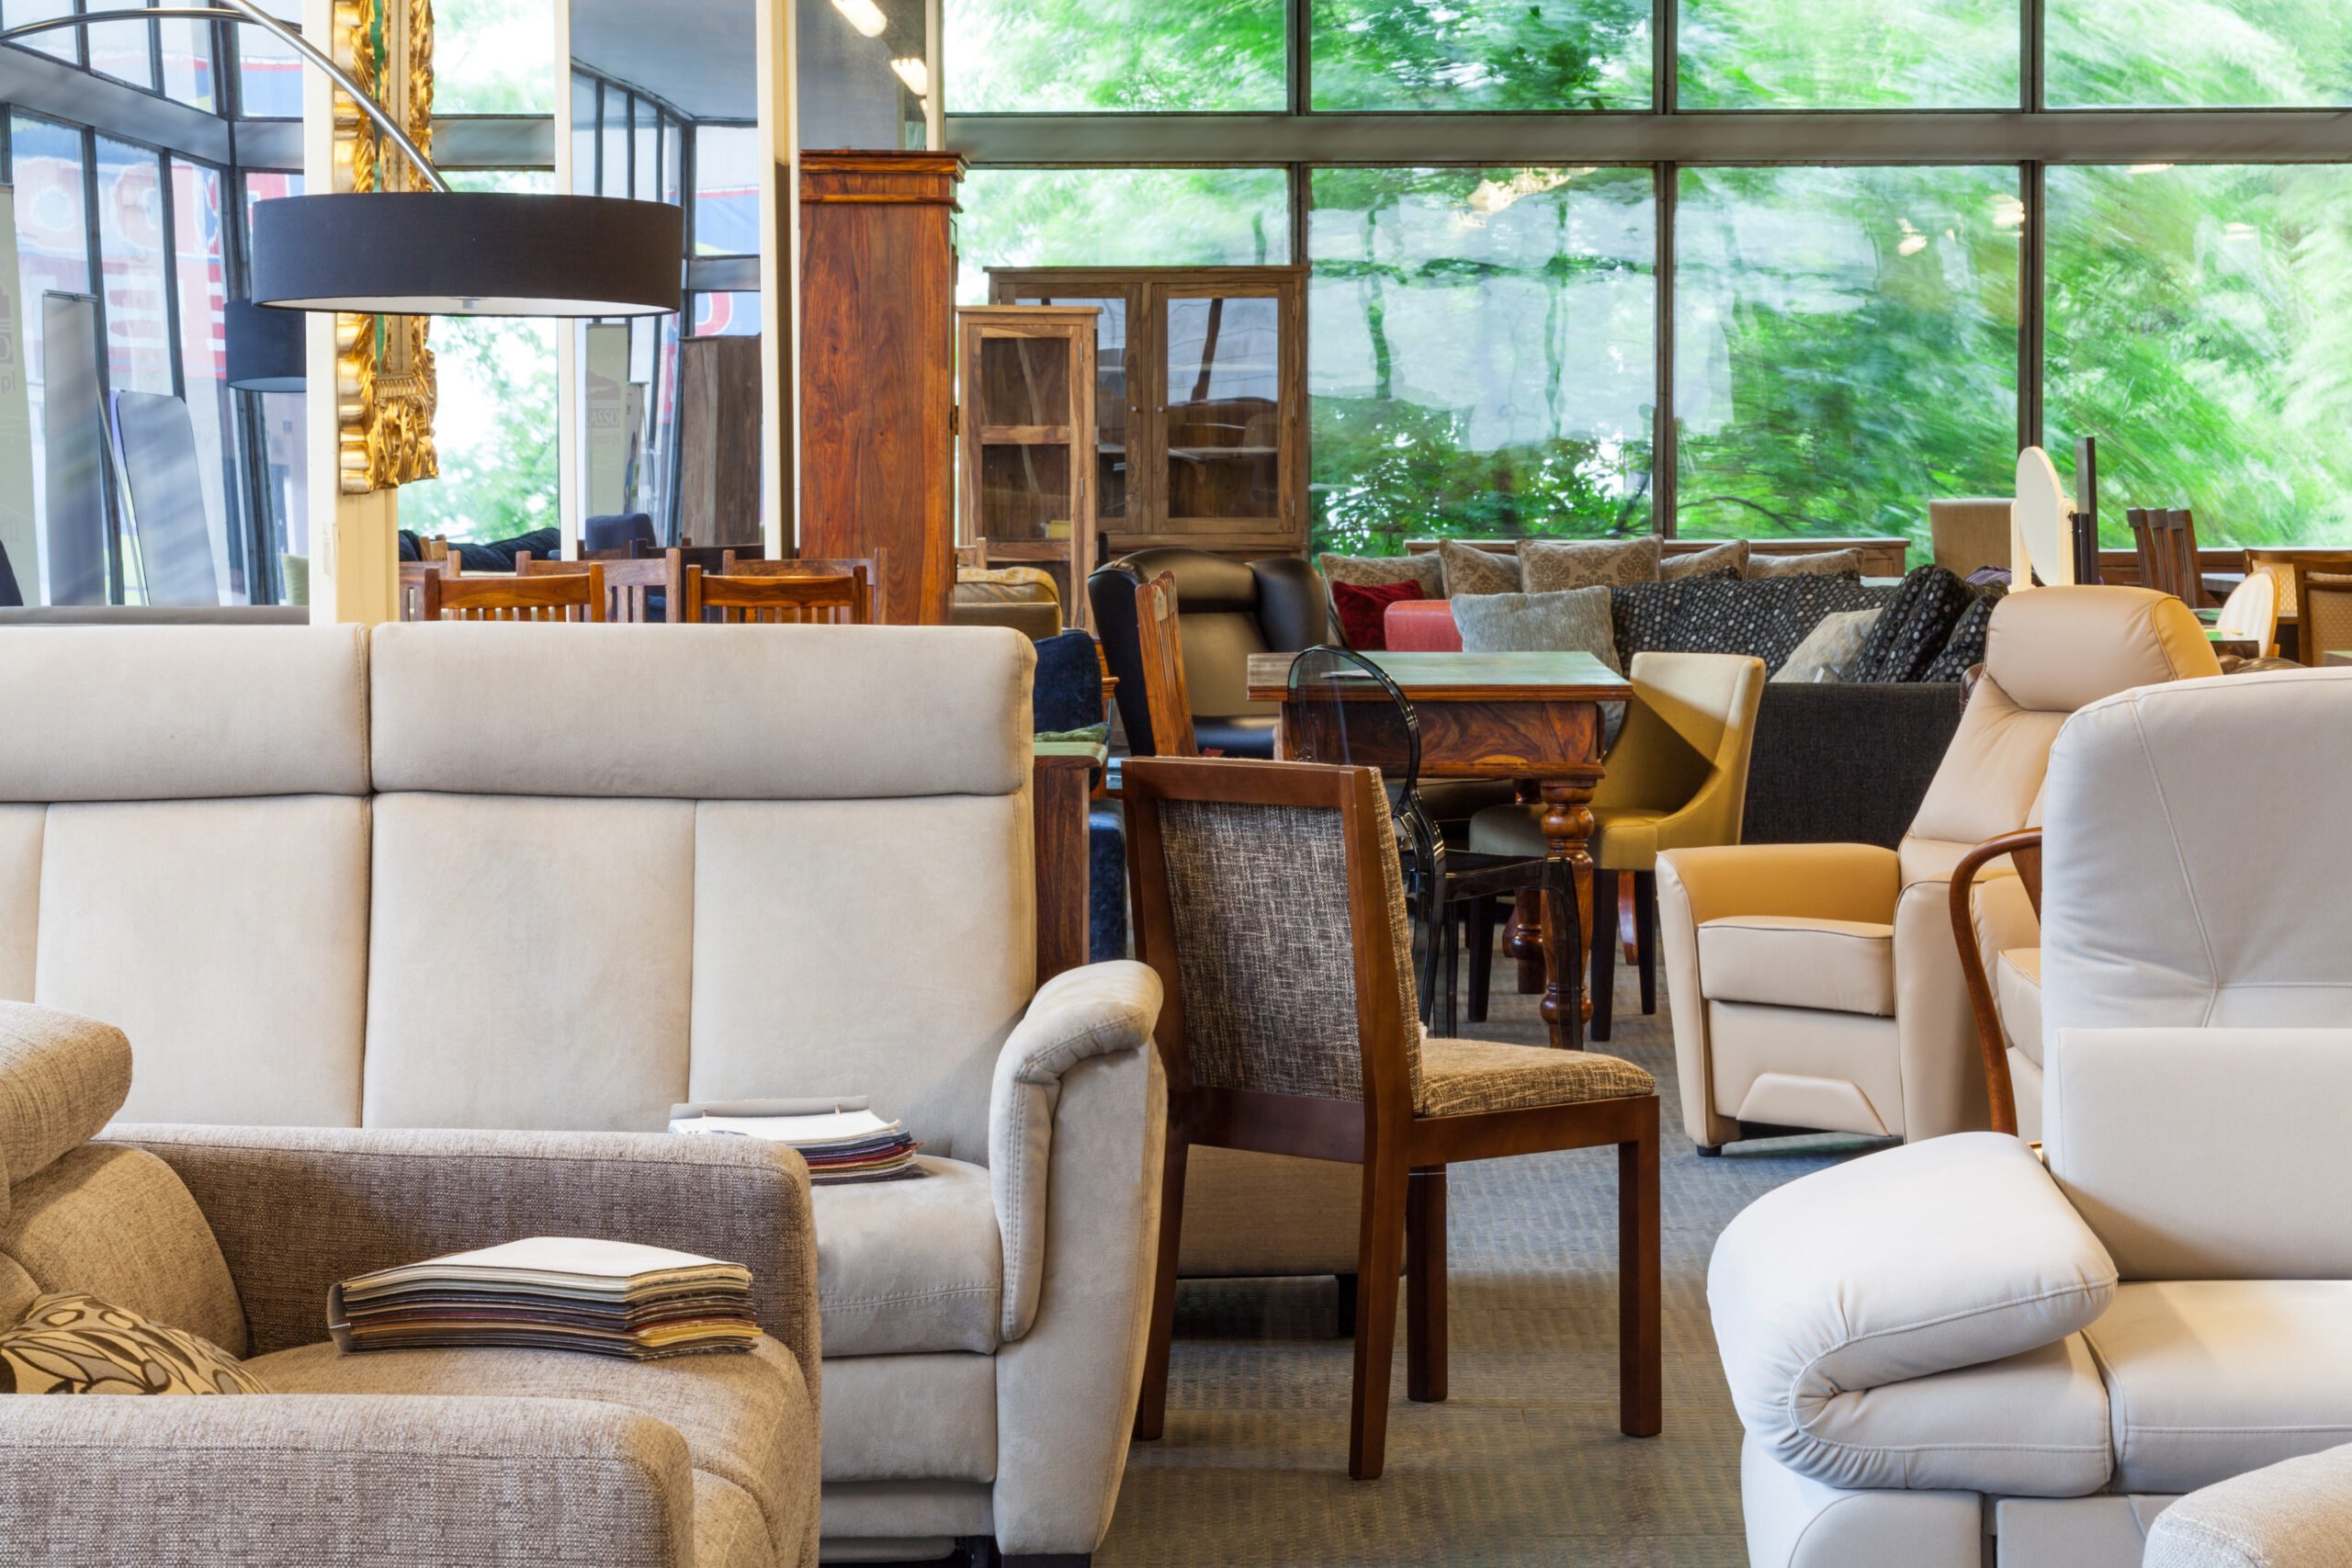 TOP 10 BEST Used Furniture Stores in Austin, TX